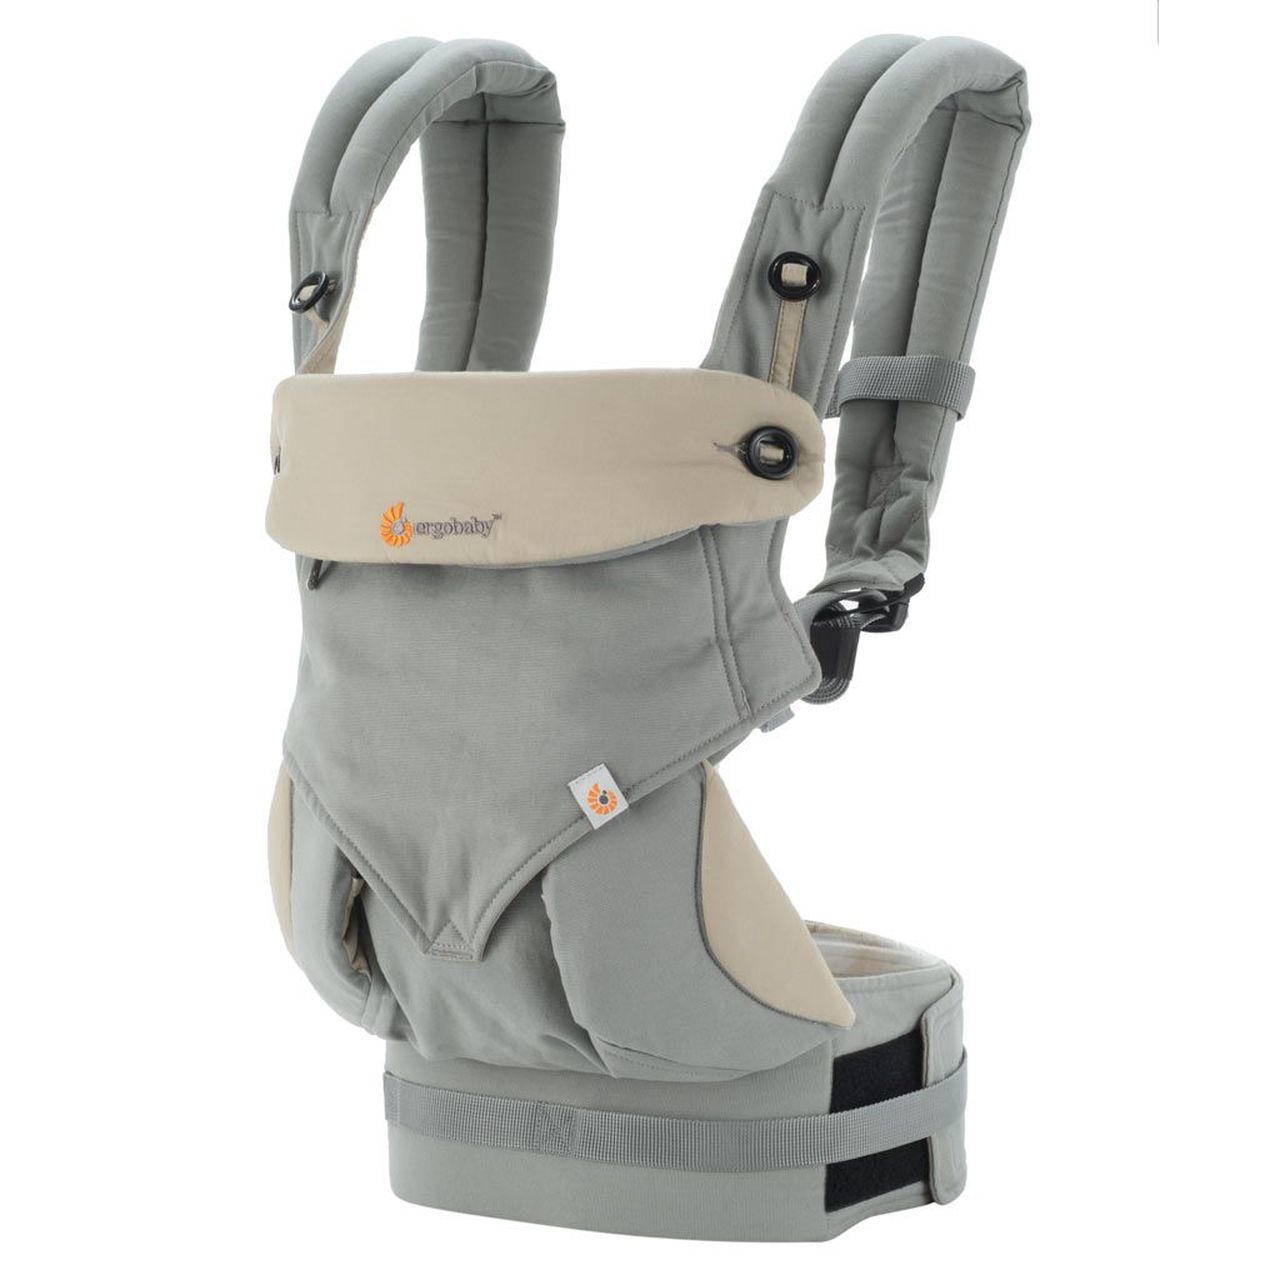 ErgoBaby 4 Position 360 Carrier